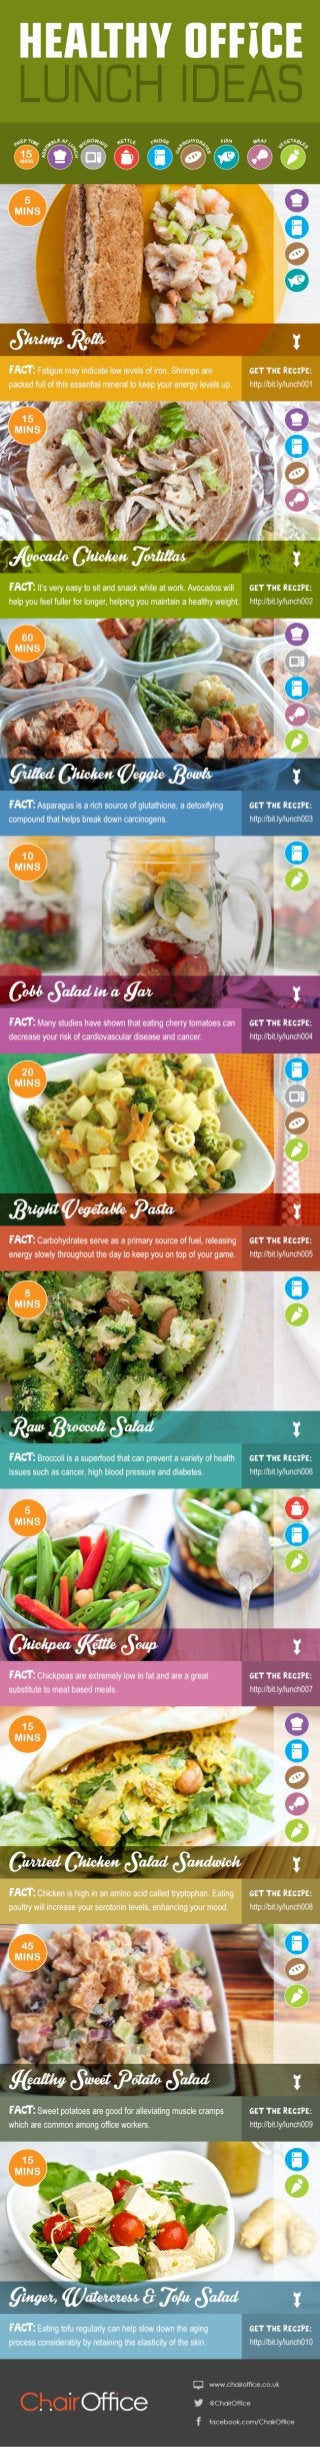 Healthy Office Lunch Ideas Infographic